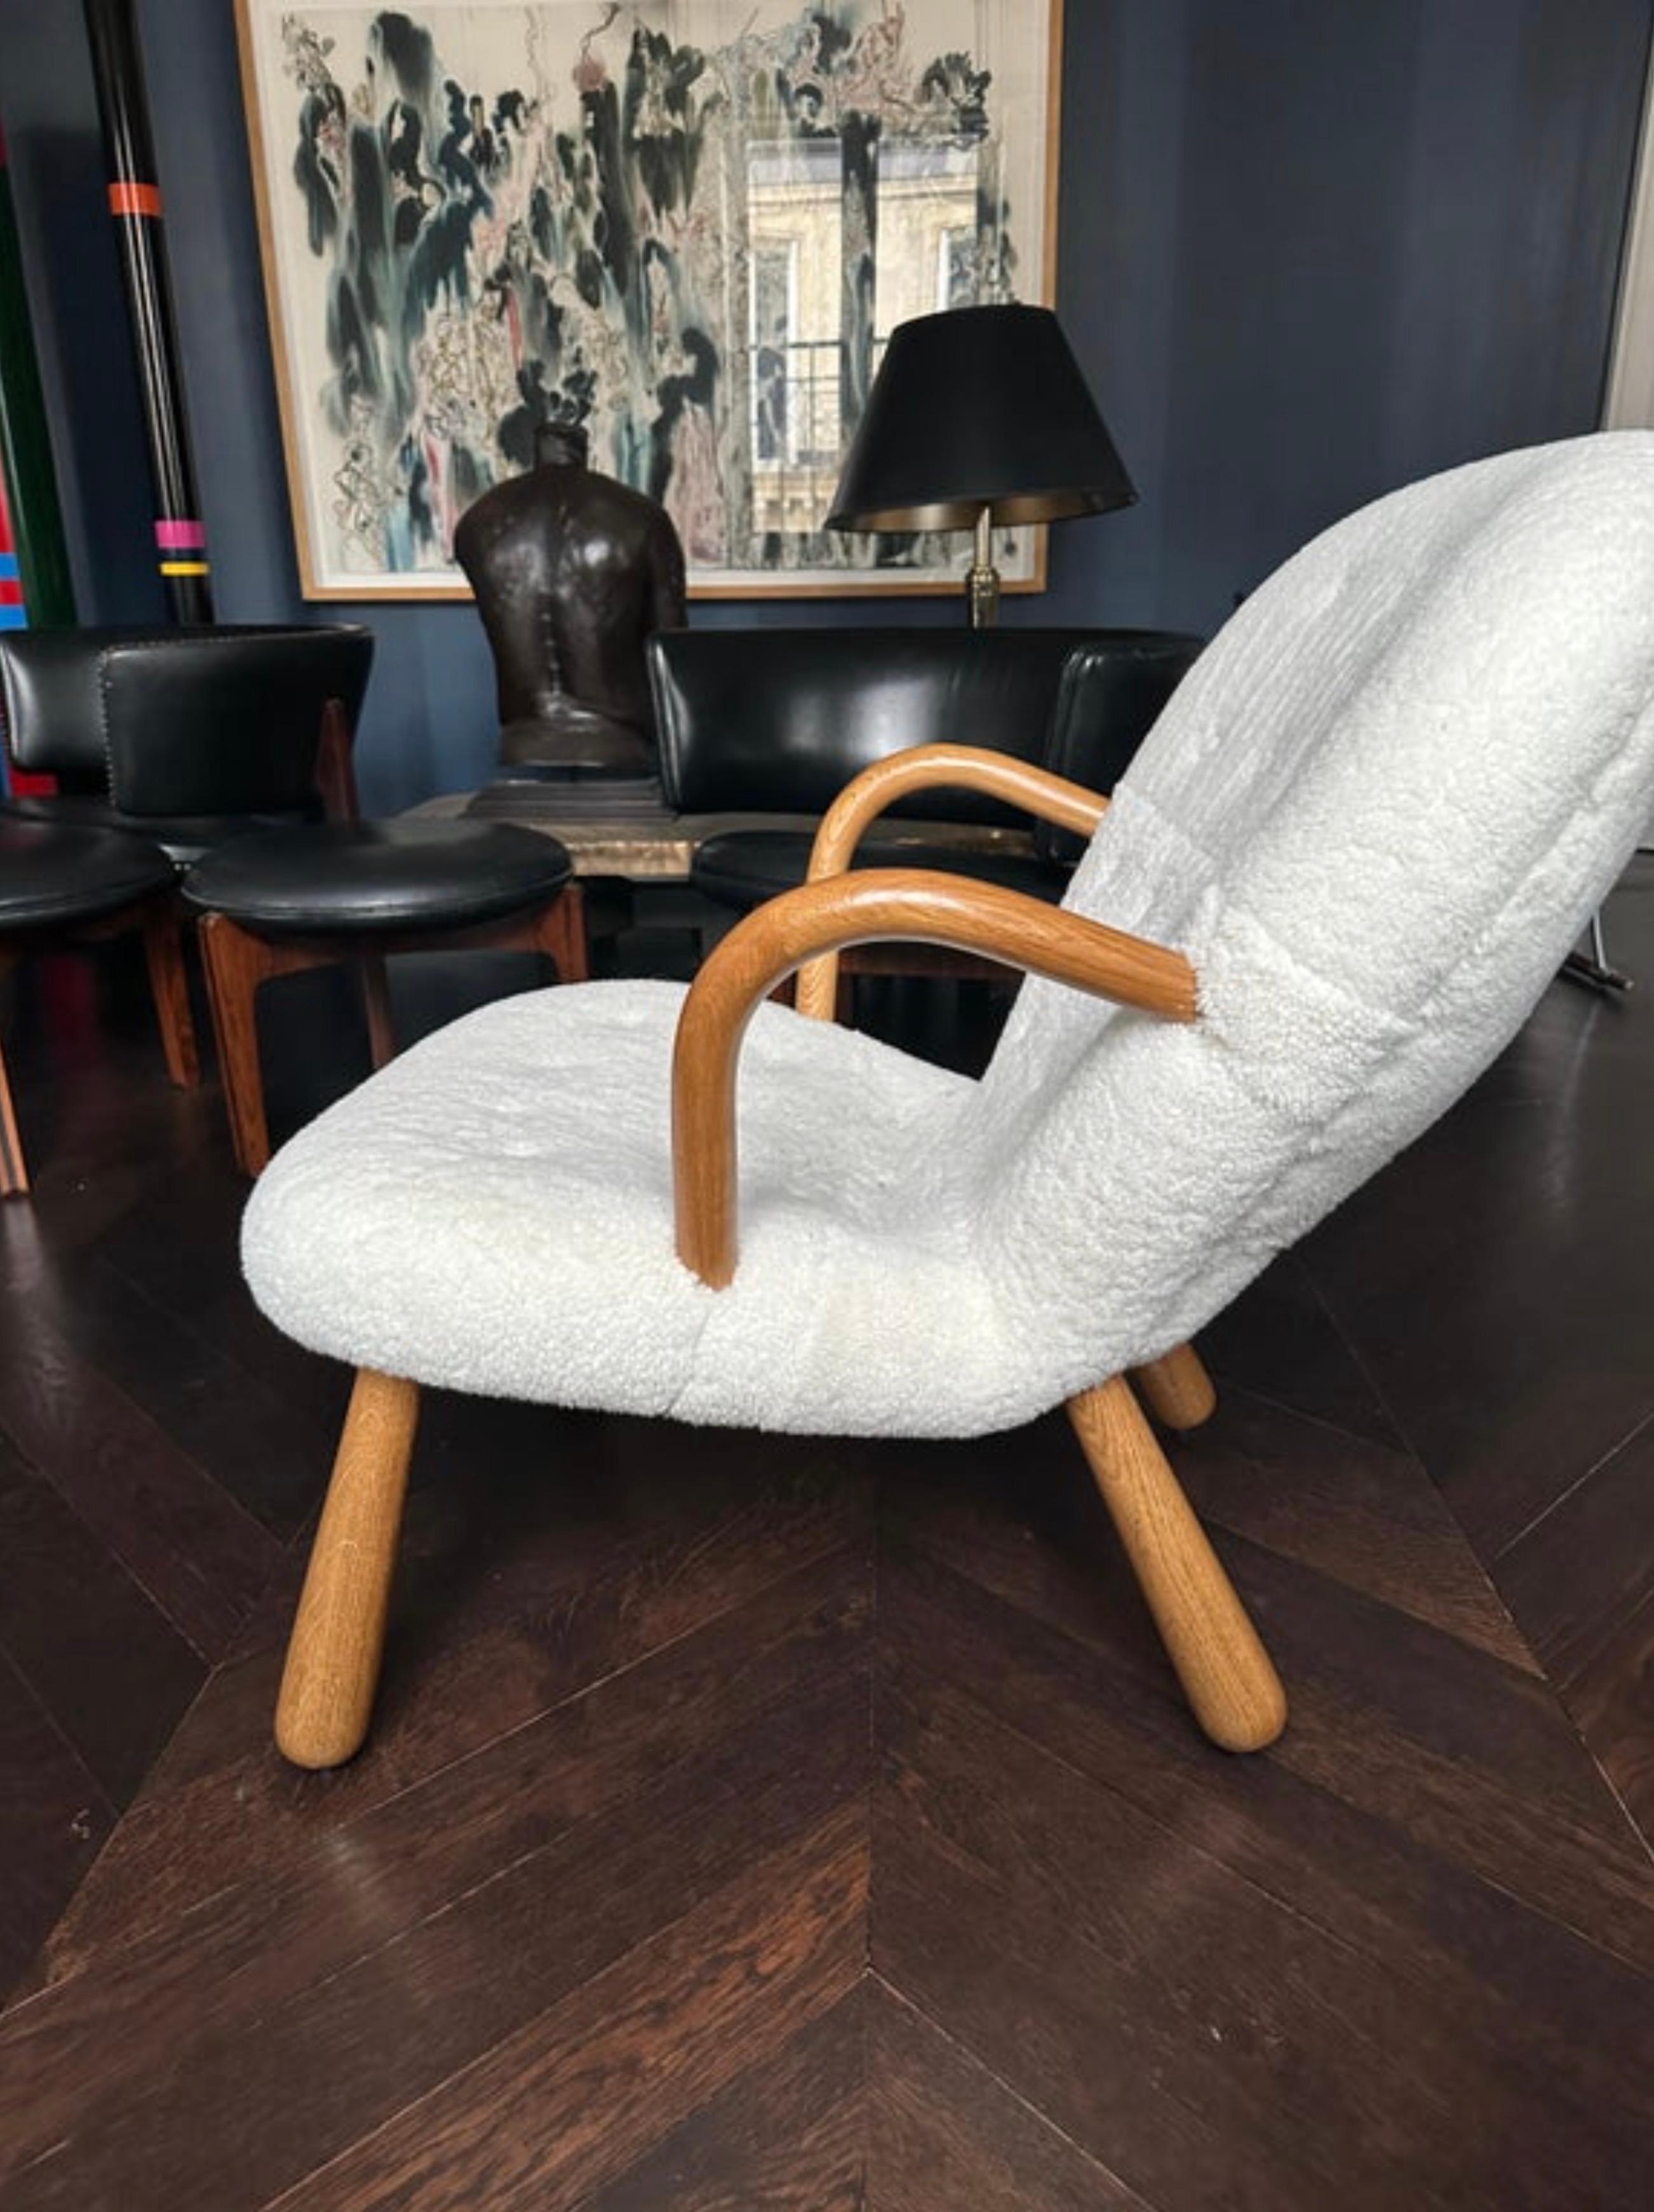  'clam' chair Arnold Madsen style oak and lambskin Sweden 1990s For Sale 2